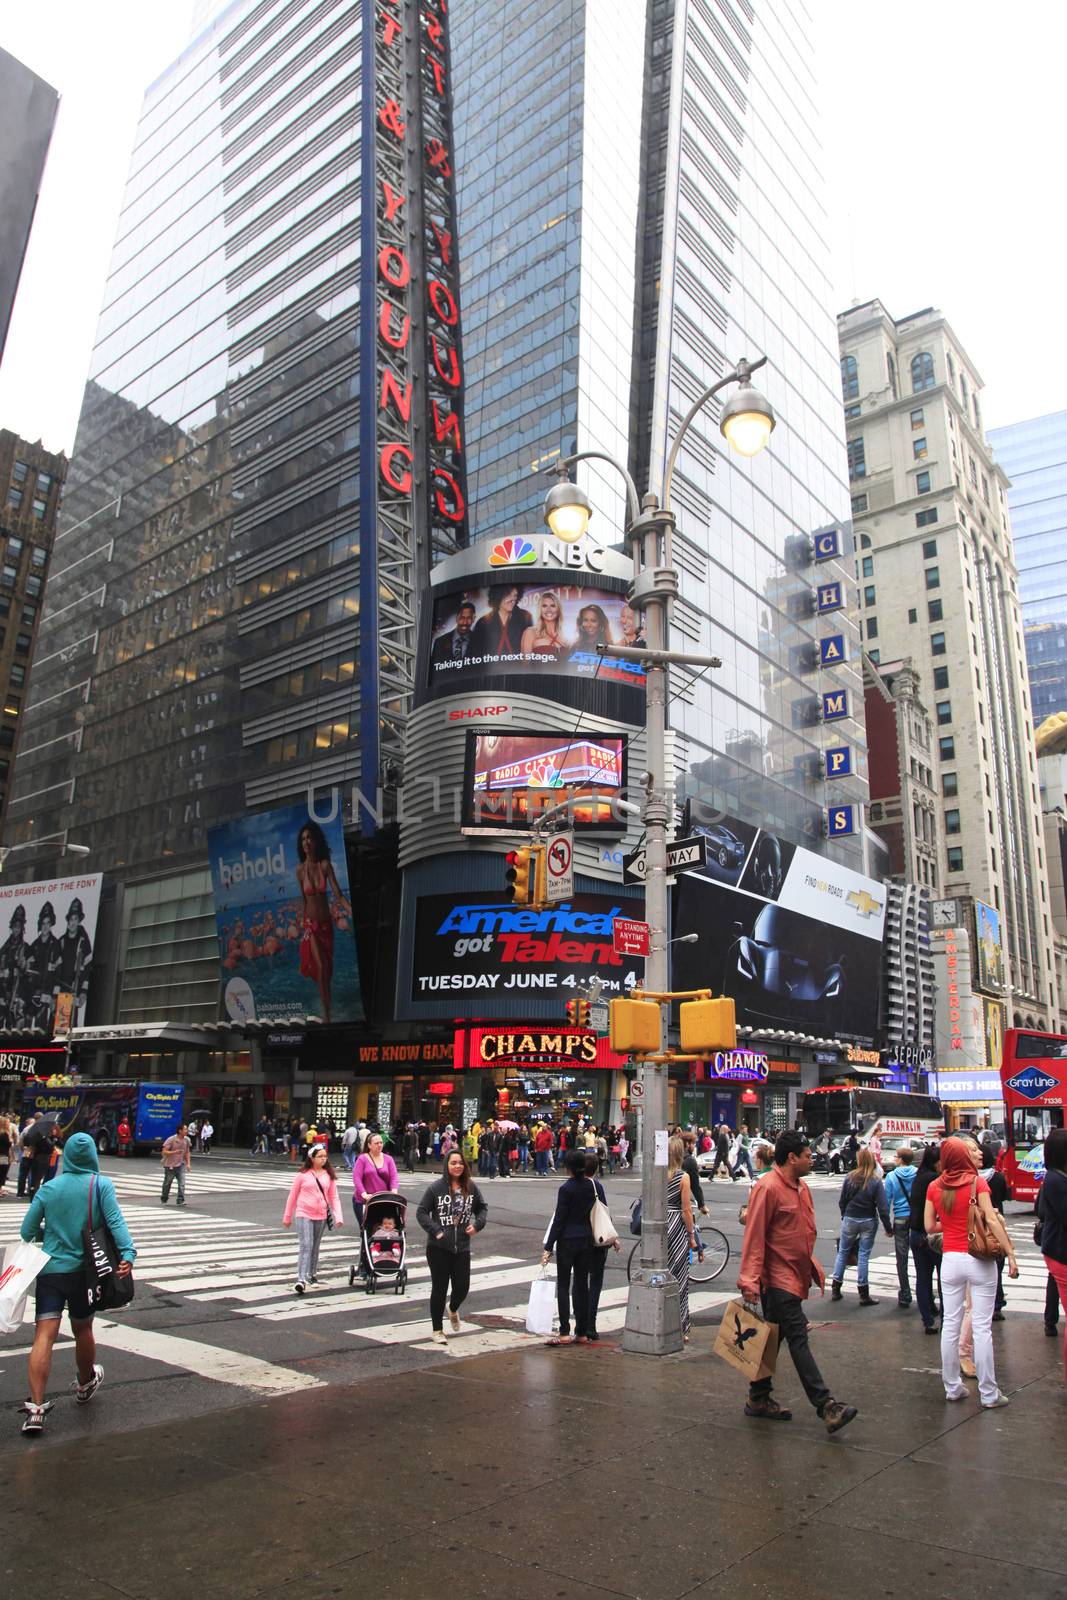 New York City, NY, USA - May 18, 2013: Times Square, featured with Broadway Theaters and huge number of LED signs, is a symbol of New York City and the United States, May 18, 2013 in Manhattan, New York City